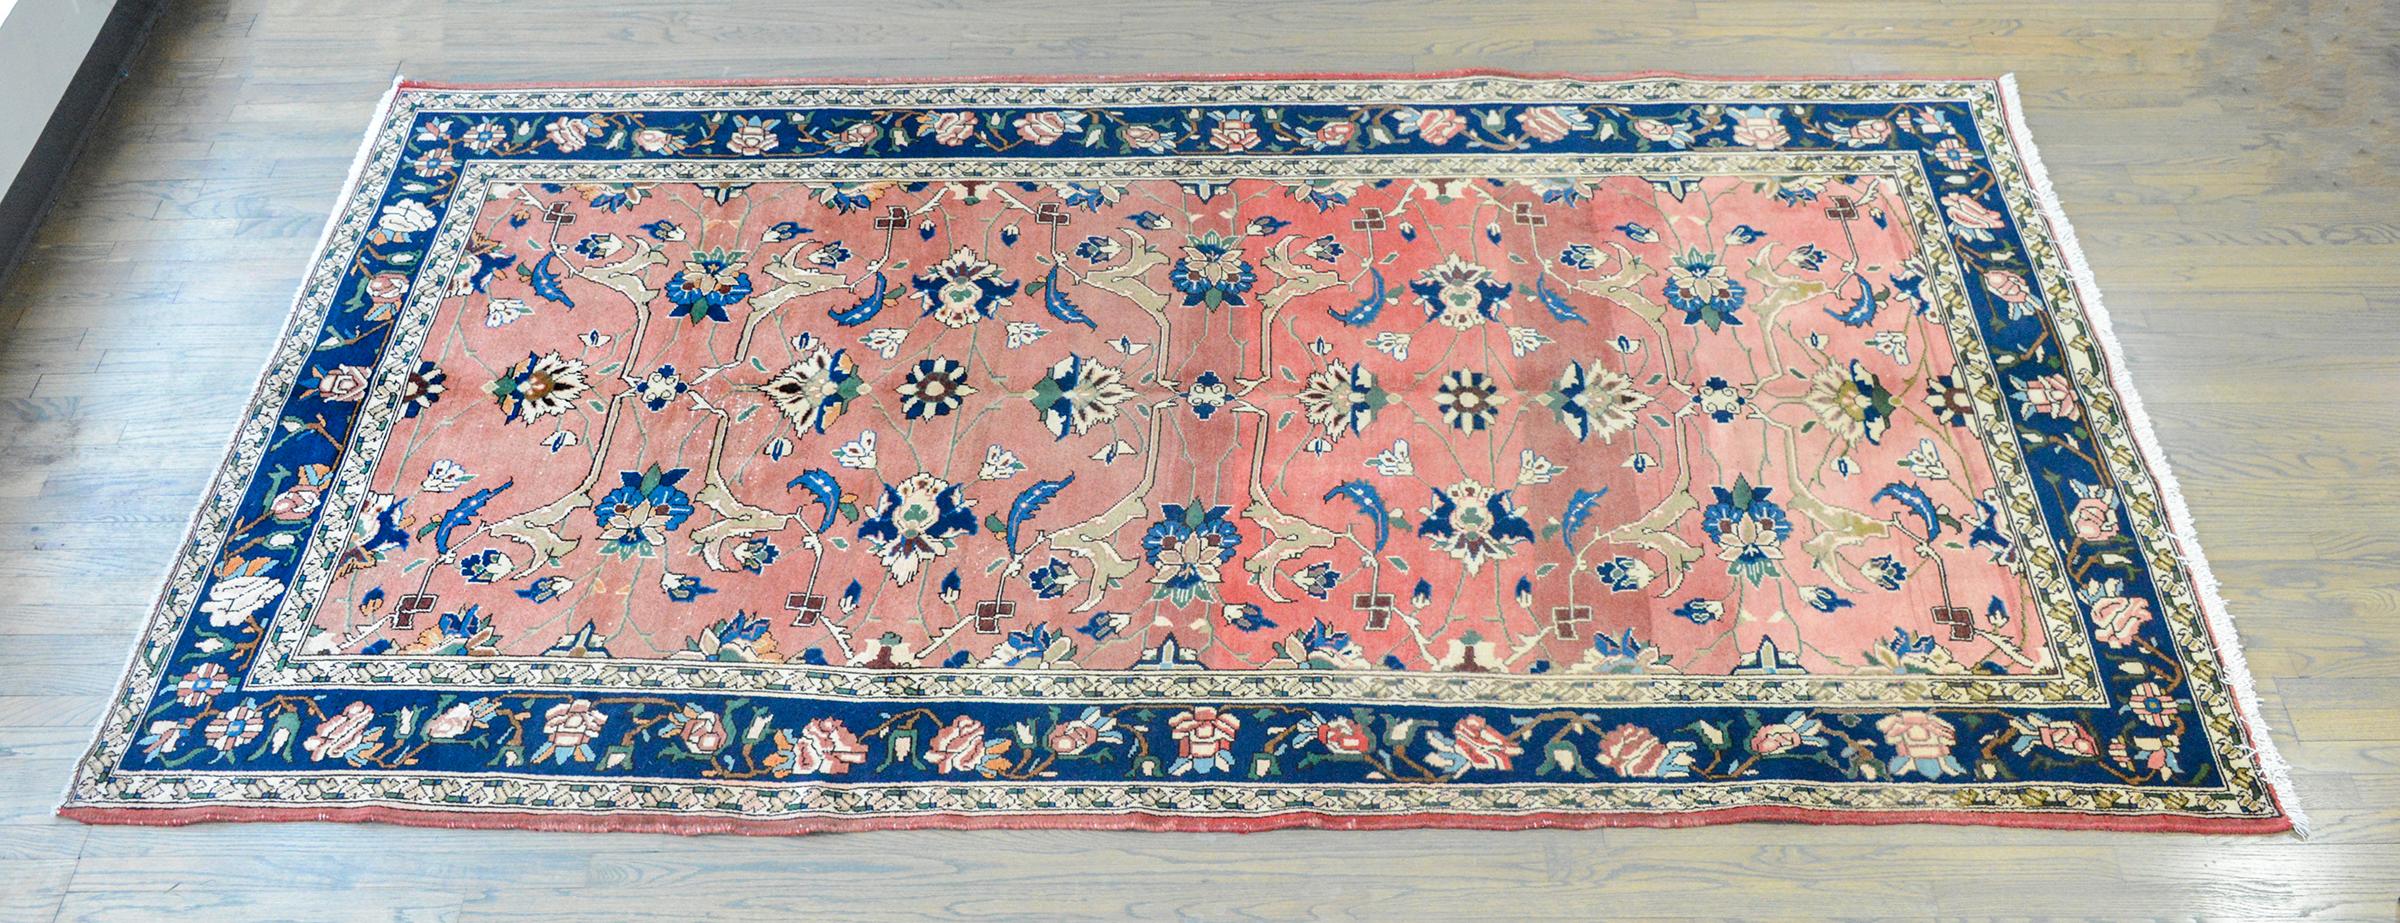 Outstanding Early 20th Century Lilihan Rug For Sale 4